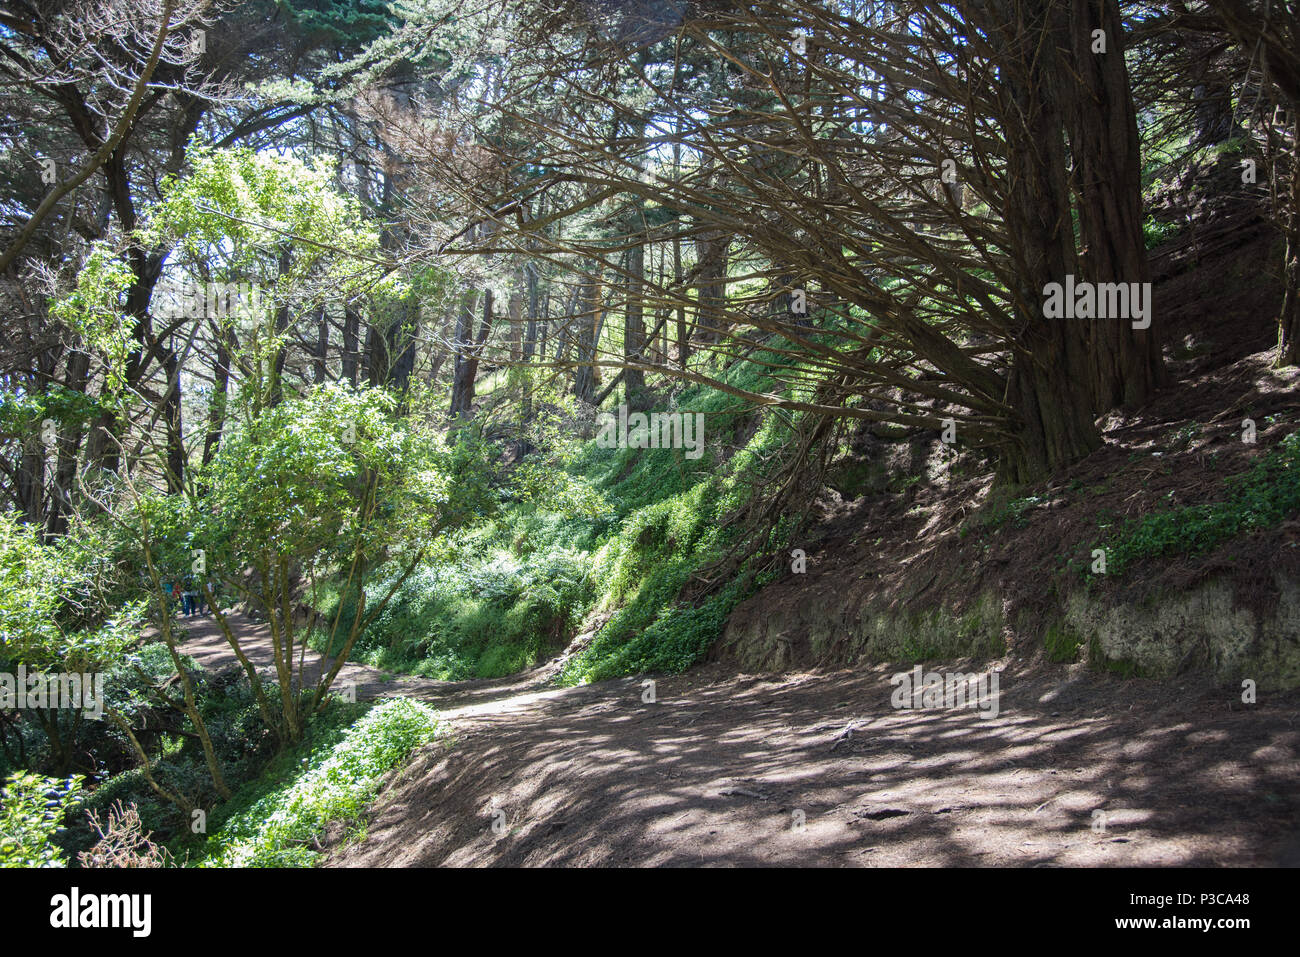 Lord of the Rings movie location on Mount Victoria with lush forest greenery in Wellington, New Zealand Stock Photo